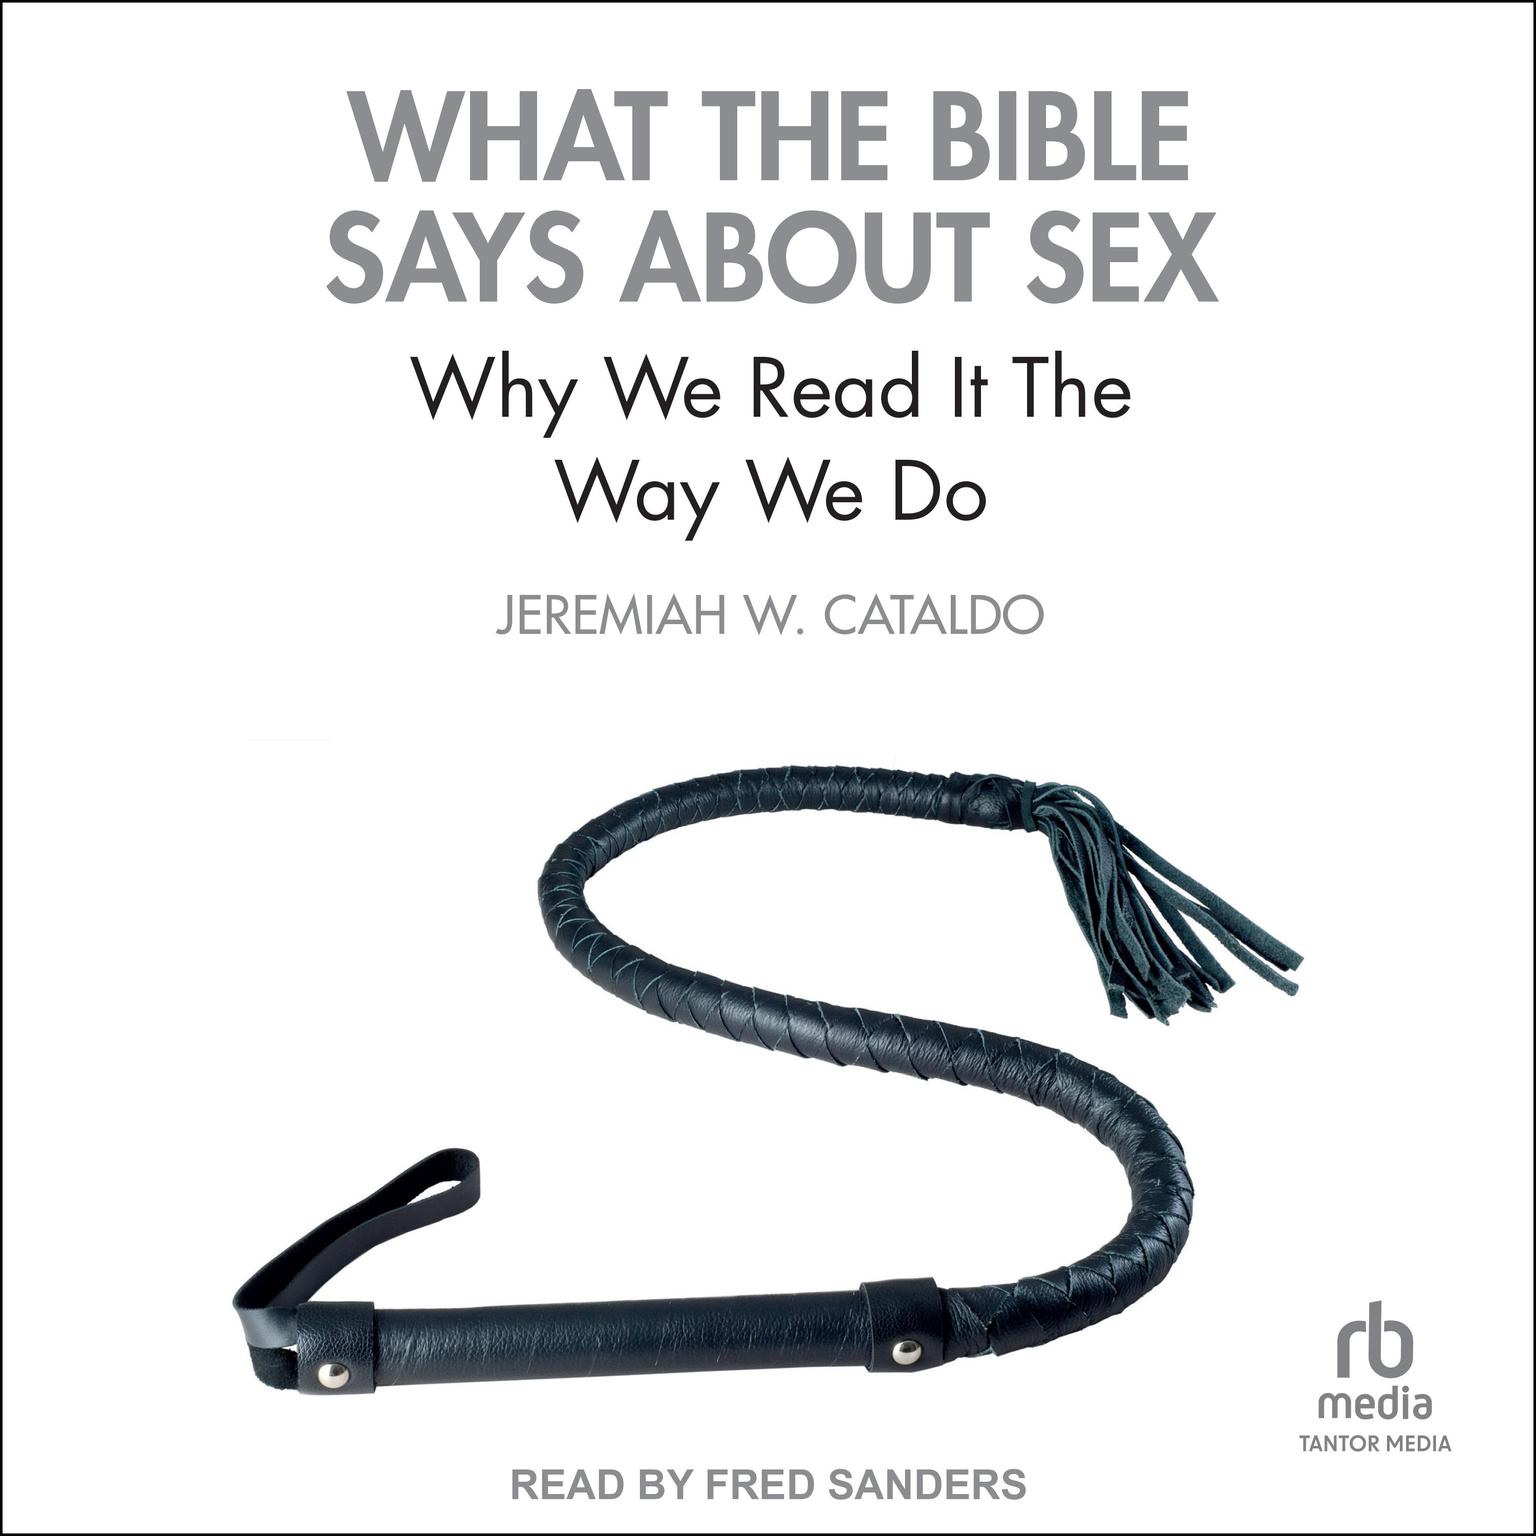 What the Bible Says About Sex: Why We Read It The Way We Do Audiobook, by Jeremiah W. Cataldo